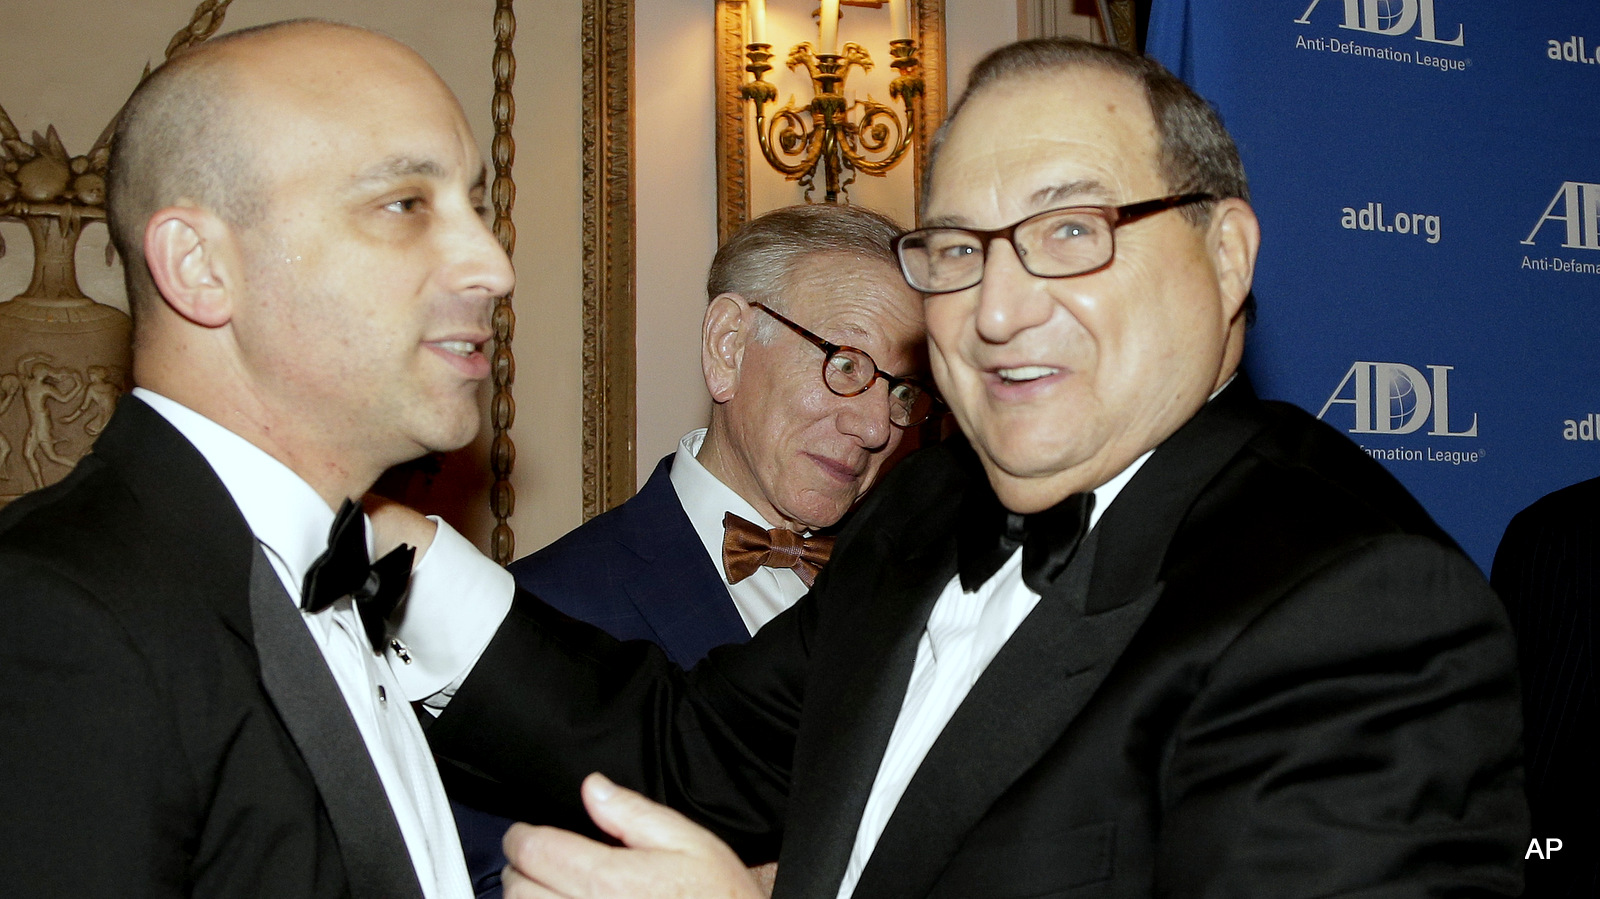 Jonathan Greenblatt, left, incoming national director for the Anti-Defamation League, talks with Abe Foxman, former director of the ADL, during a reception for a special dinner in Foxman's honor in New York.